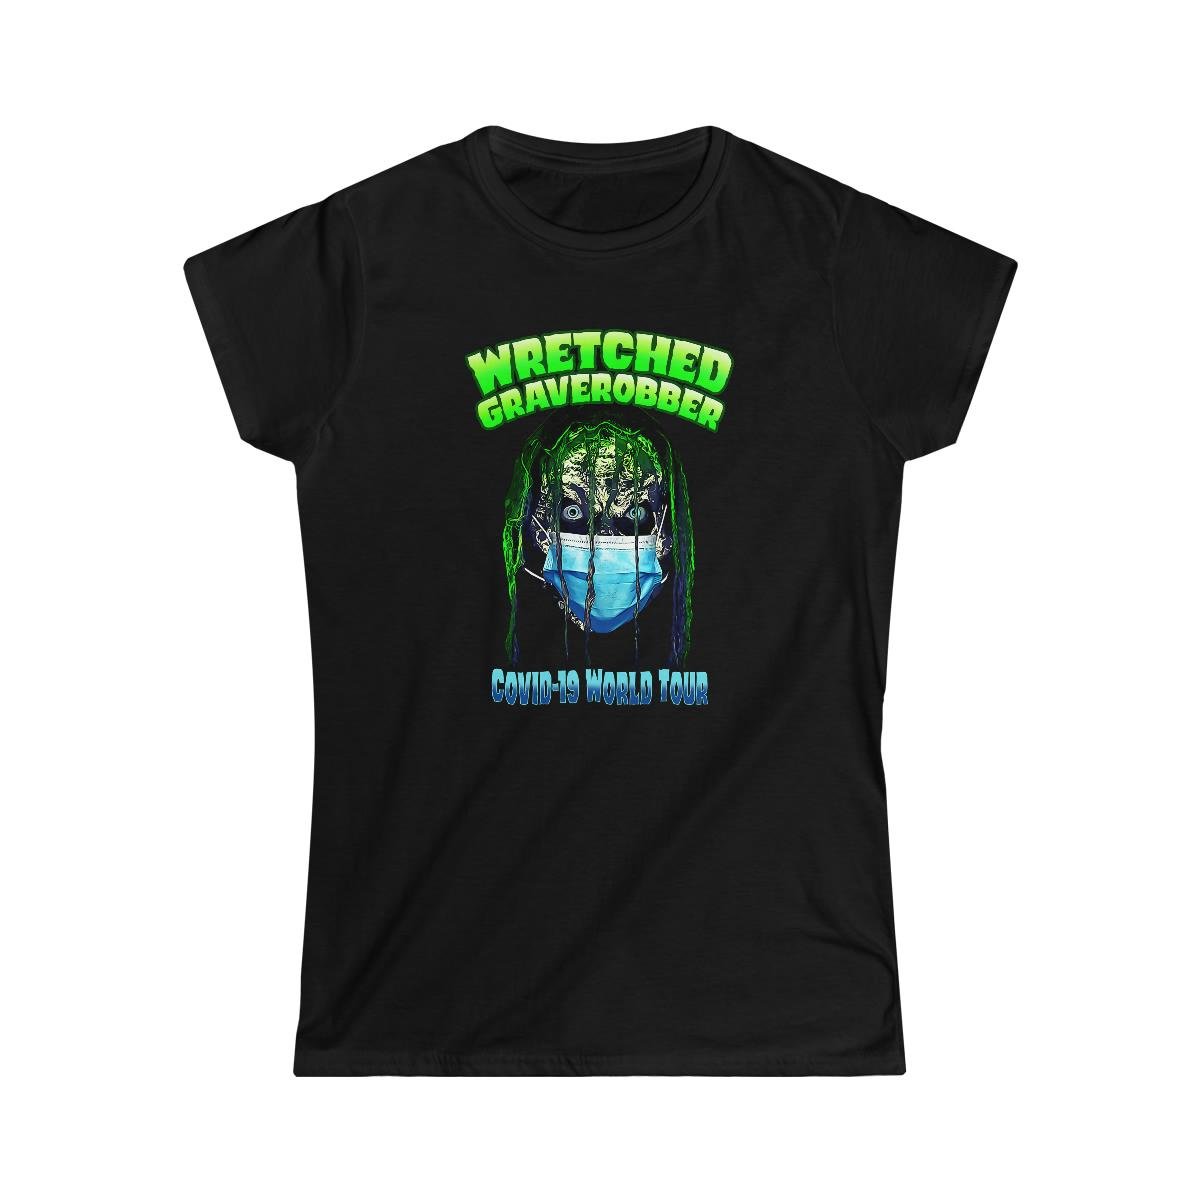 Wretched Graverobber Covid 19 World Tour Women’s Short Sleeve Tshirt (2 Sided)